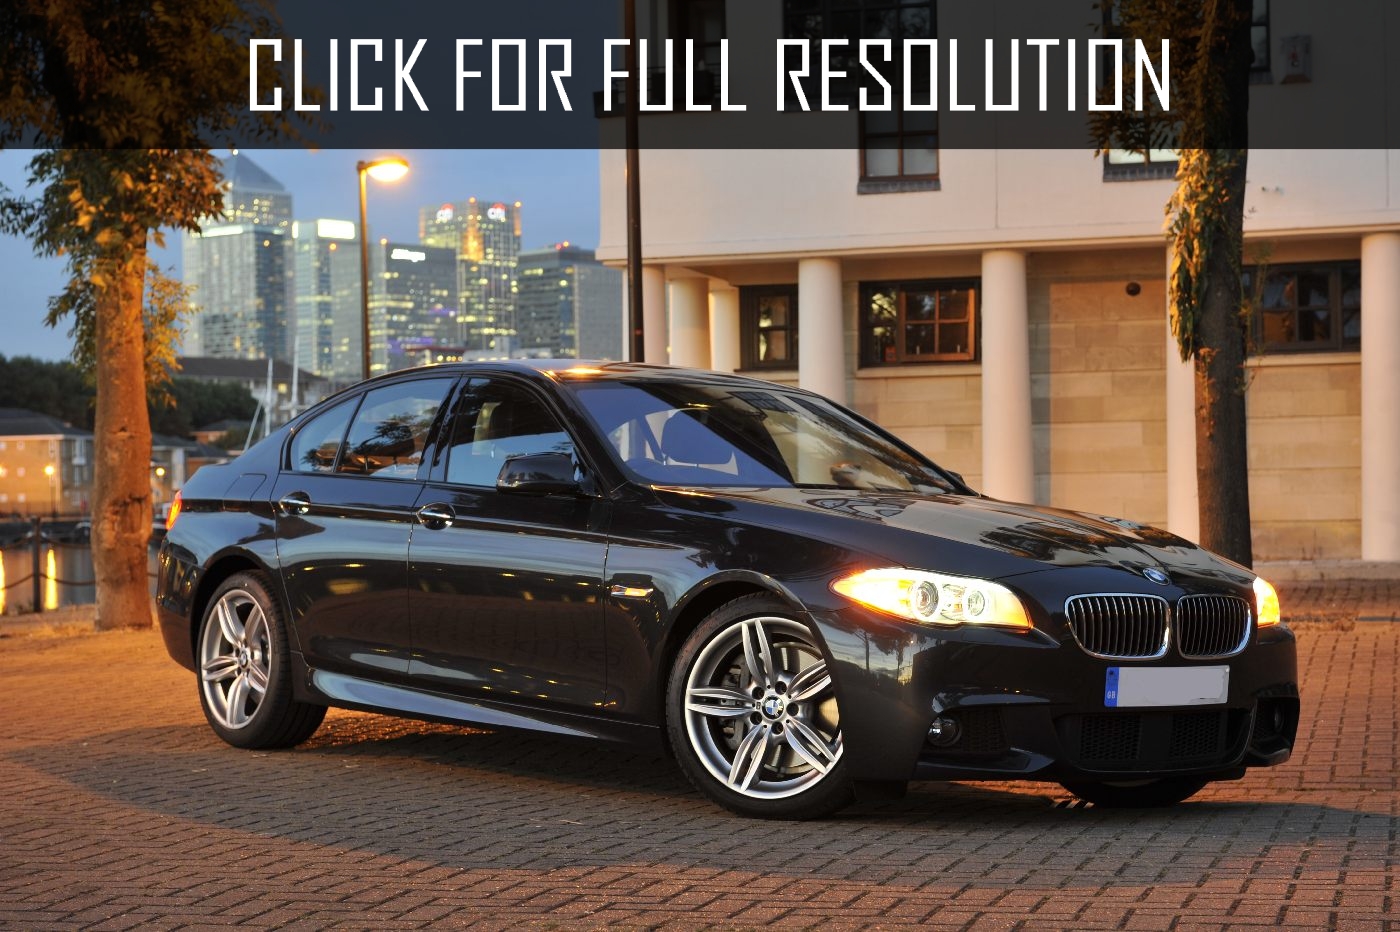 Bmw F10 530d reviews, prices, ratings with various photos